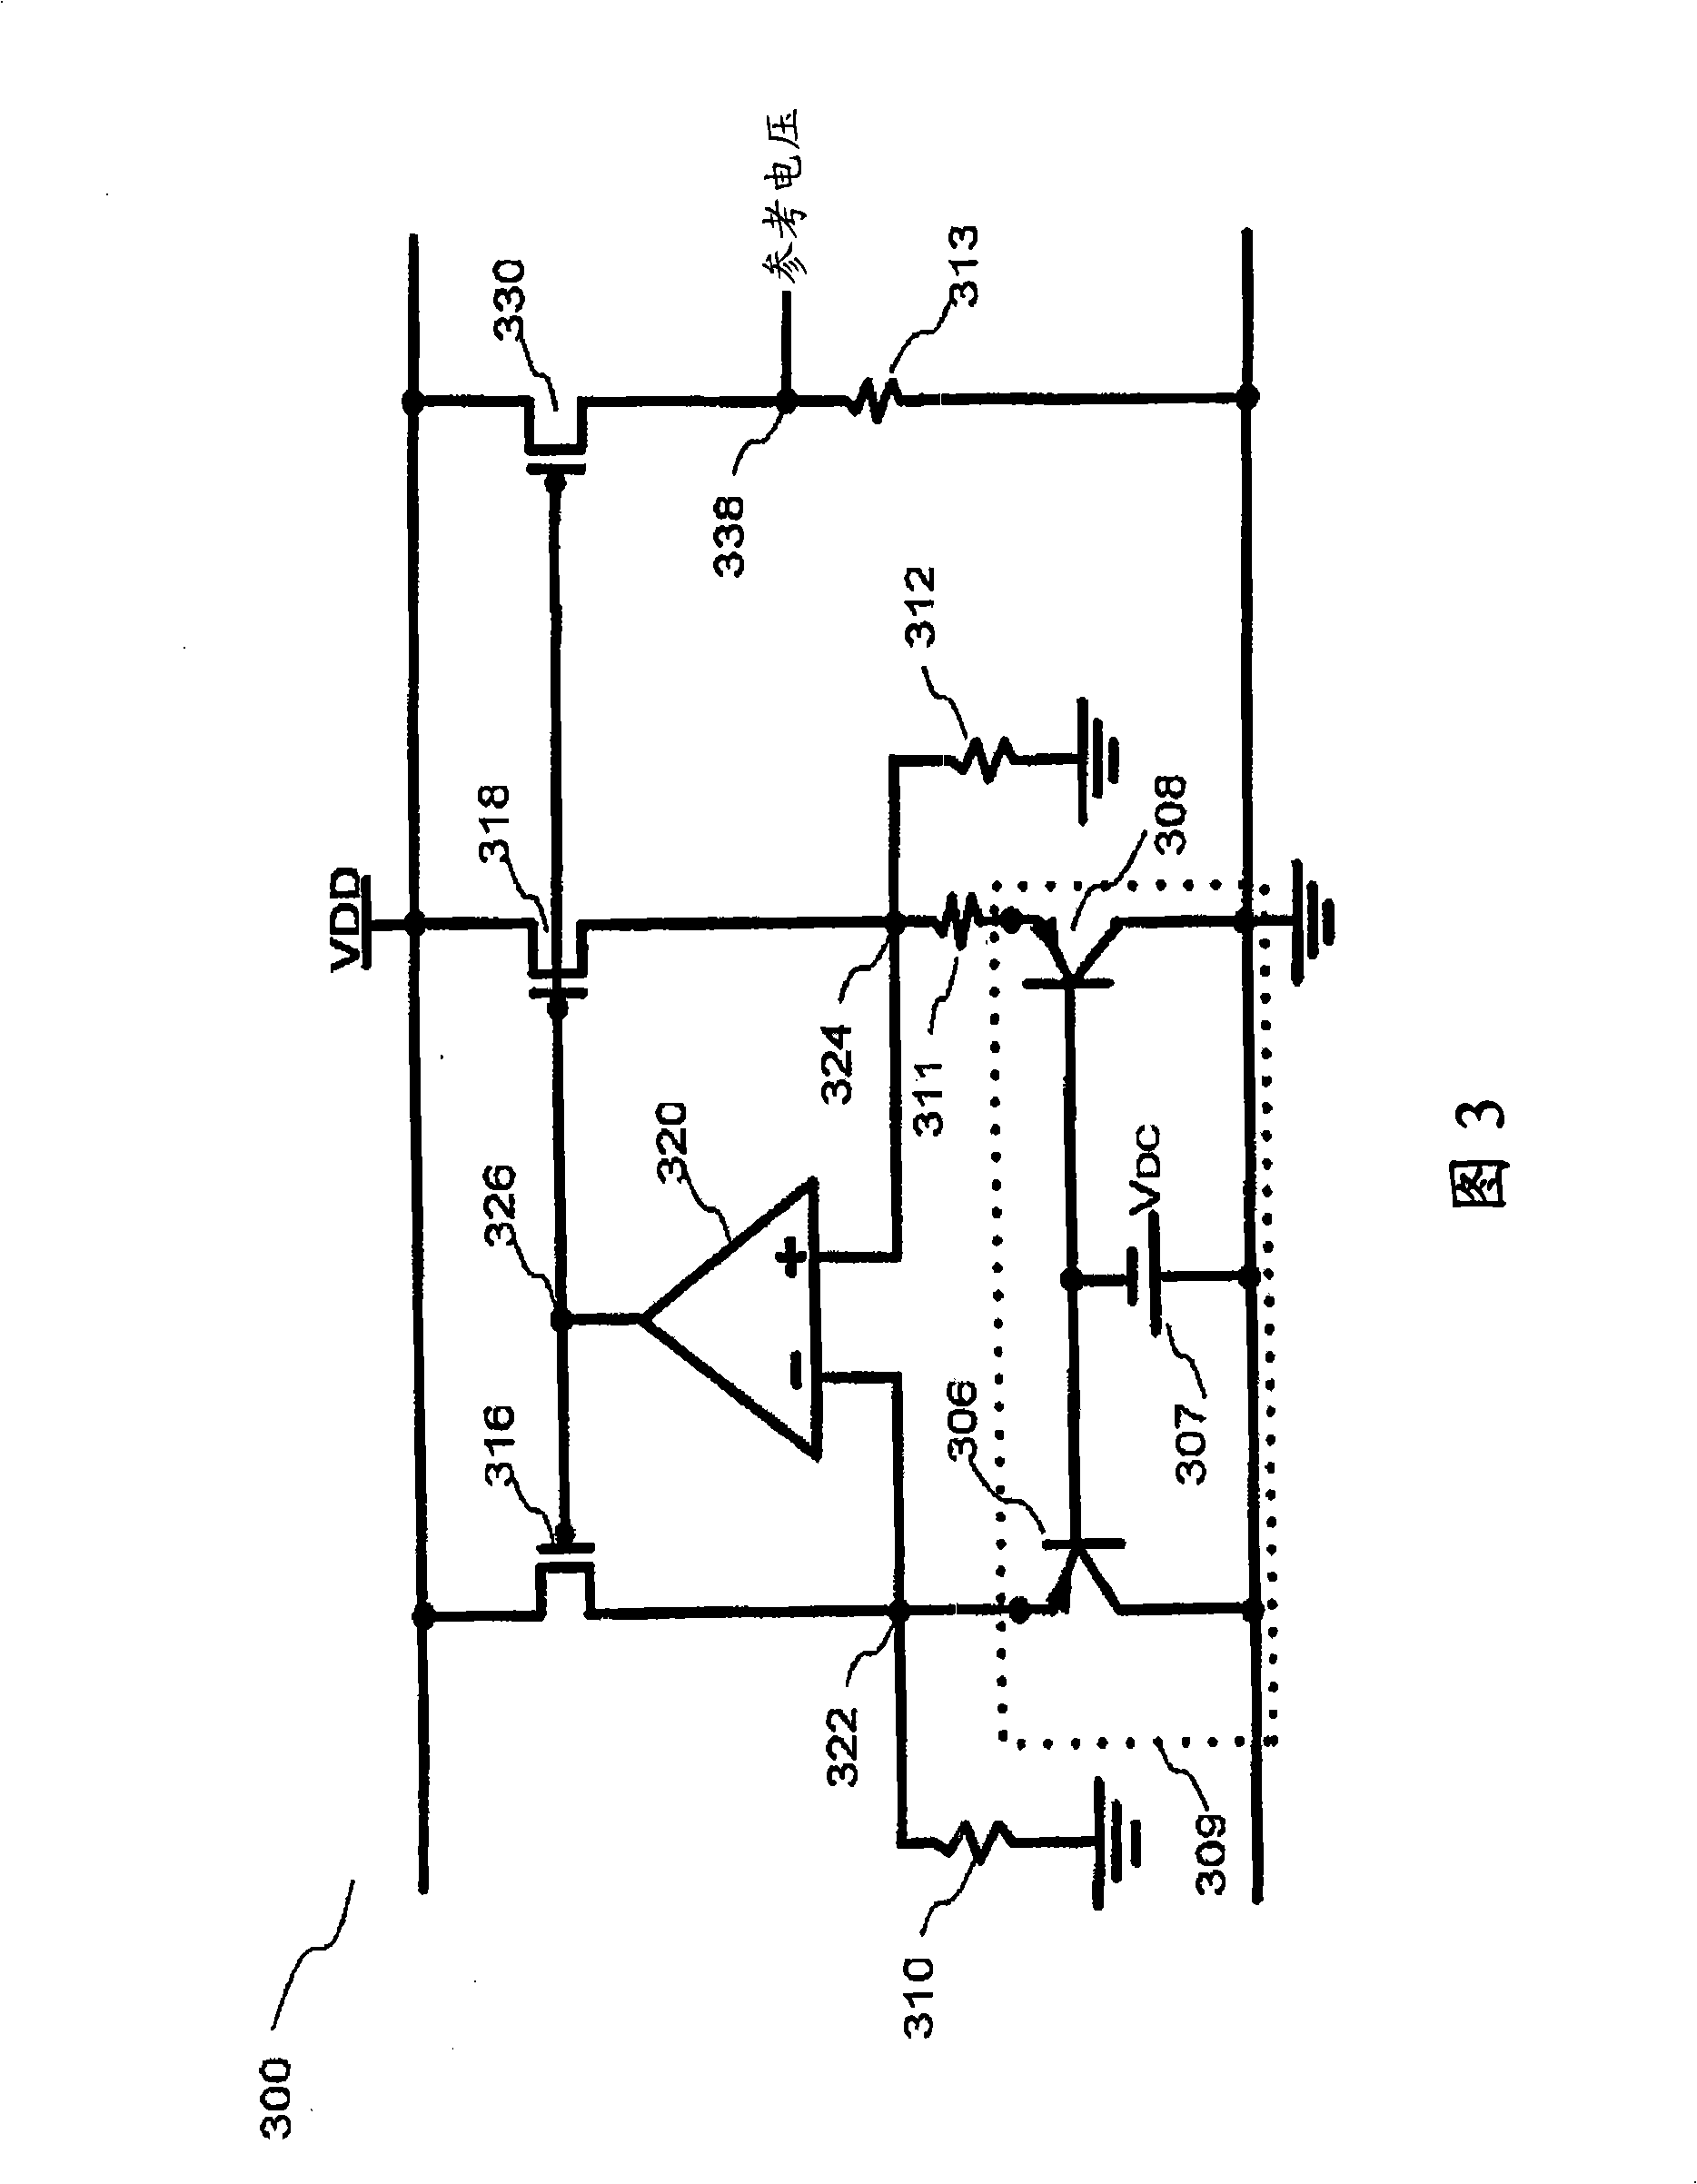 Ultra low-voltage sub-bandgap voltage reference generator